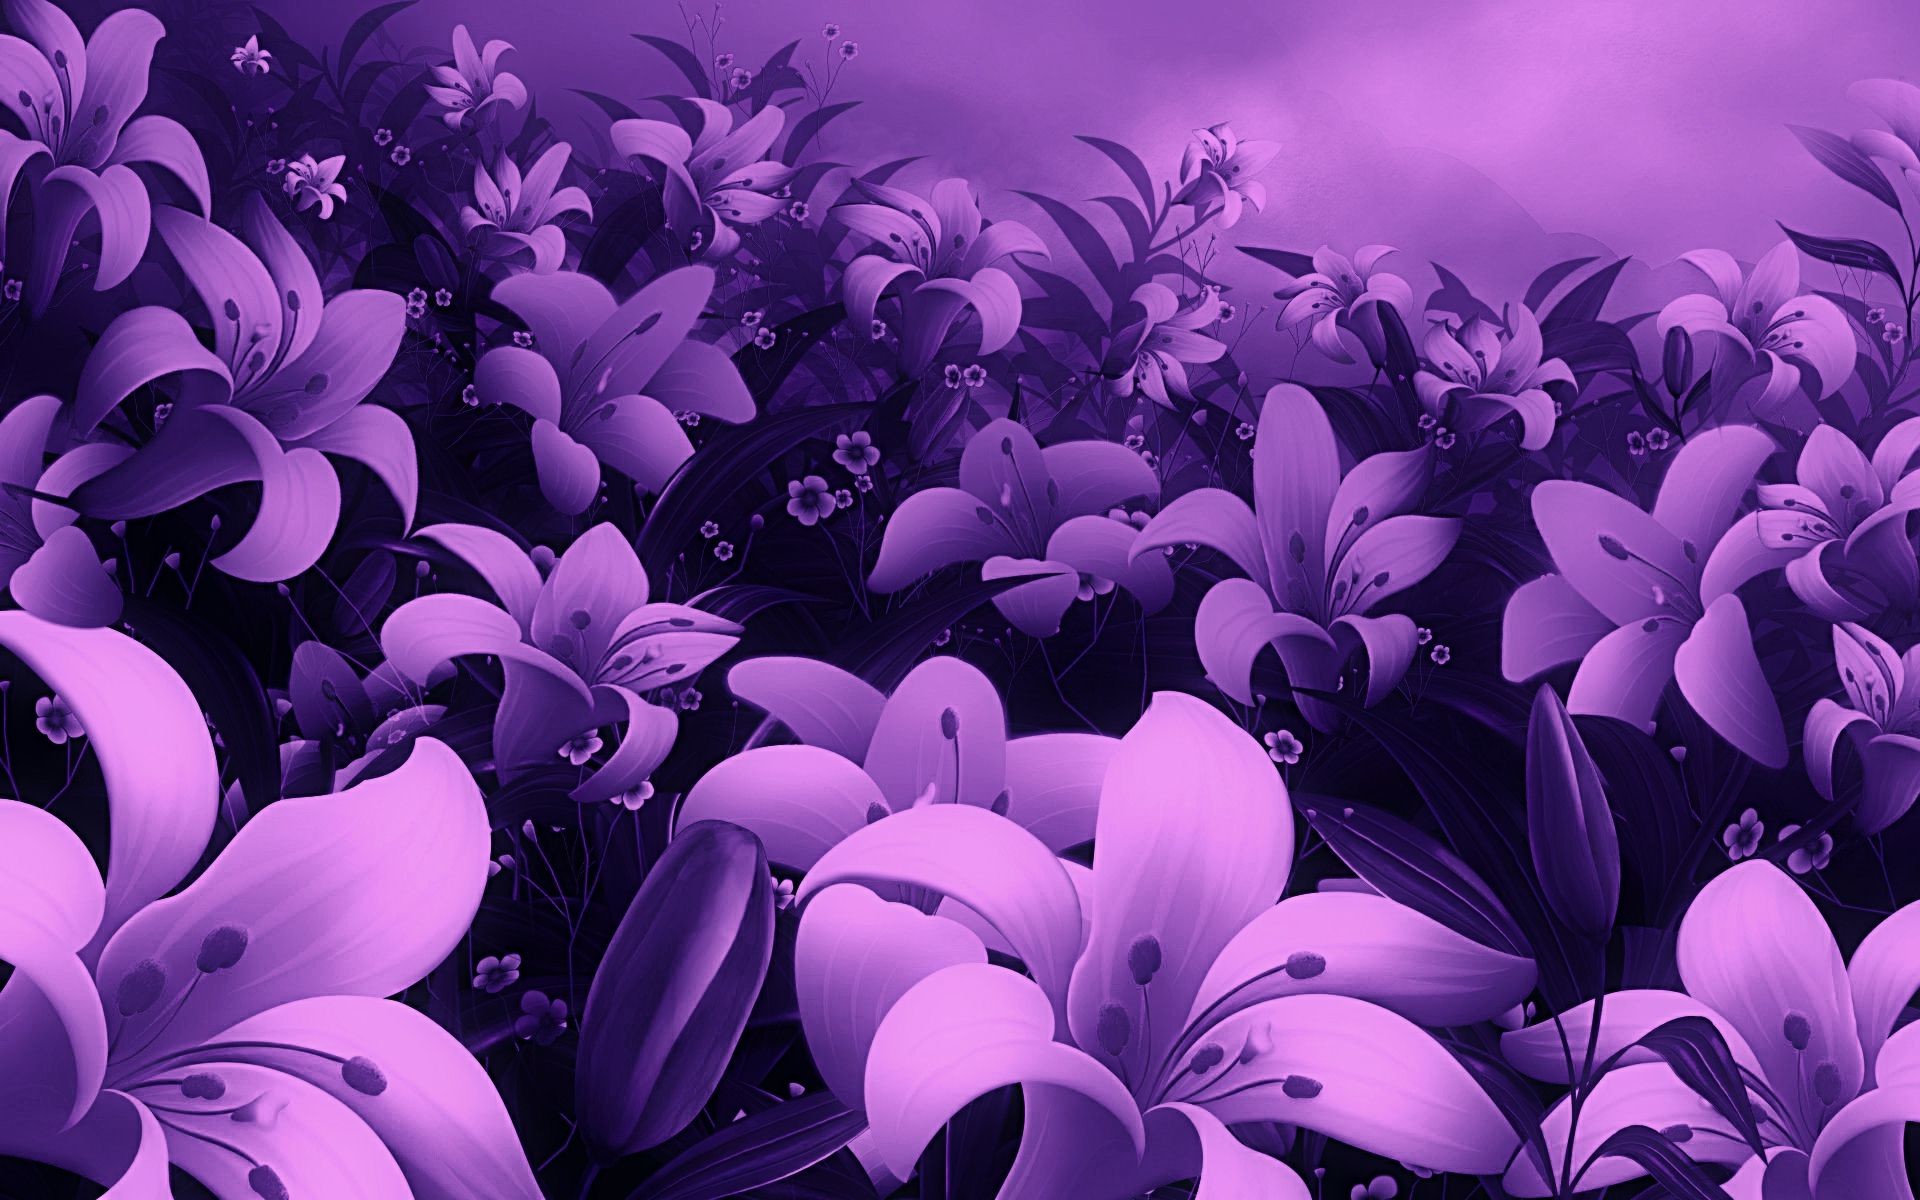 1920x1200 Awesome, Violet, Flower, Wallpaper, Full, Screen, High, Definition,  Desktop, Background, Photos, Free, Amazing, Cool, Download Wallpaper,  1920Ã1200 ...